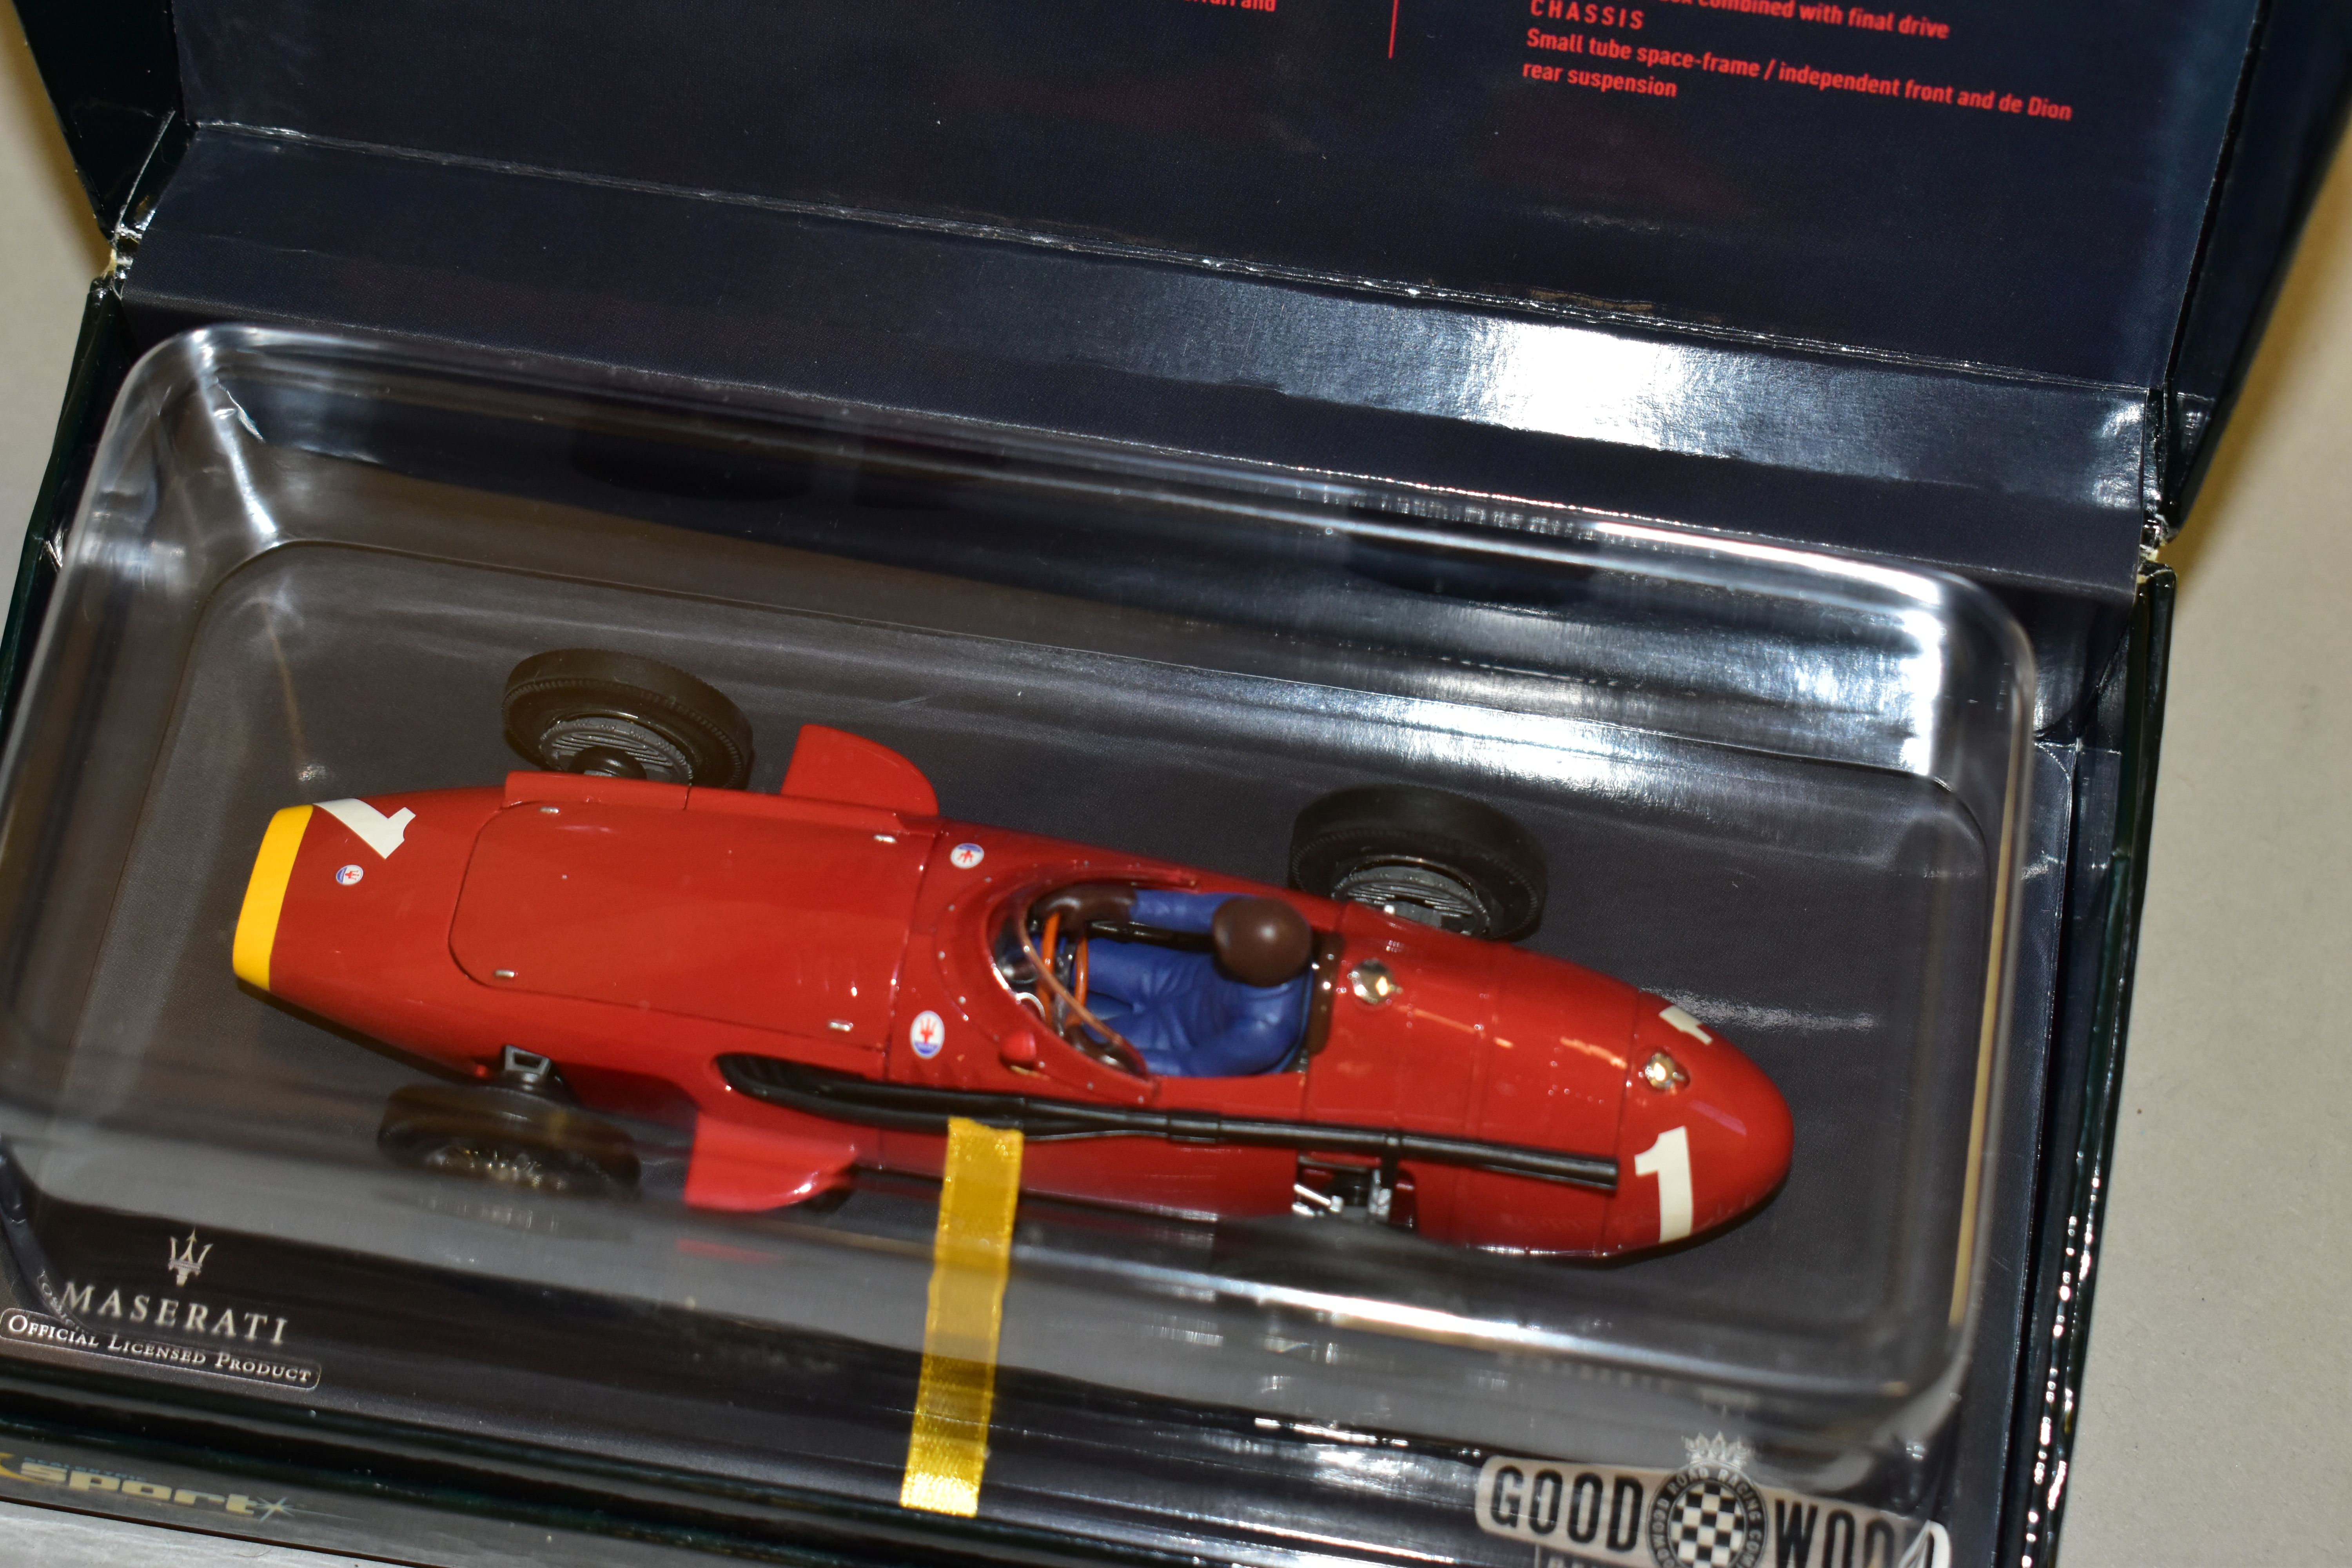 THREE BOXED SCALEXTRIC LIMITED EDITION CLASSIC GRAND PRIX GOODWOOD REVIVAL MEETING F1 RACING CARS, - Image 7 of 8